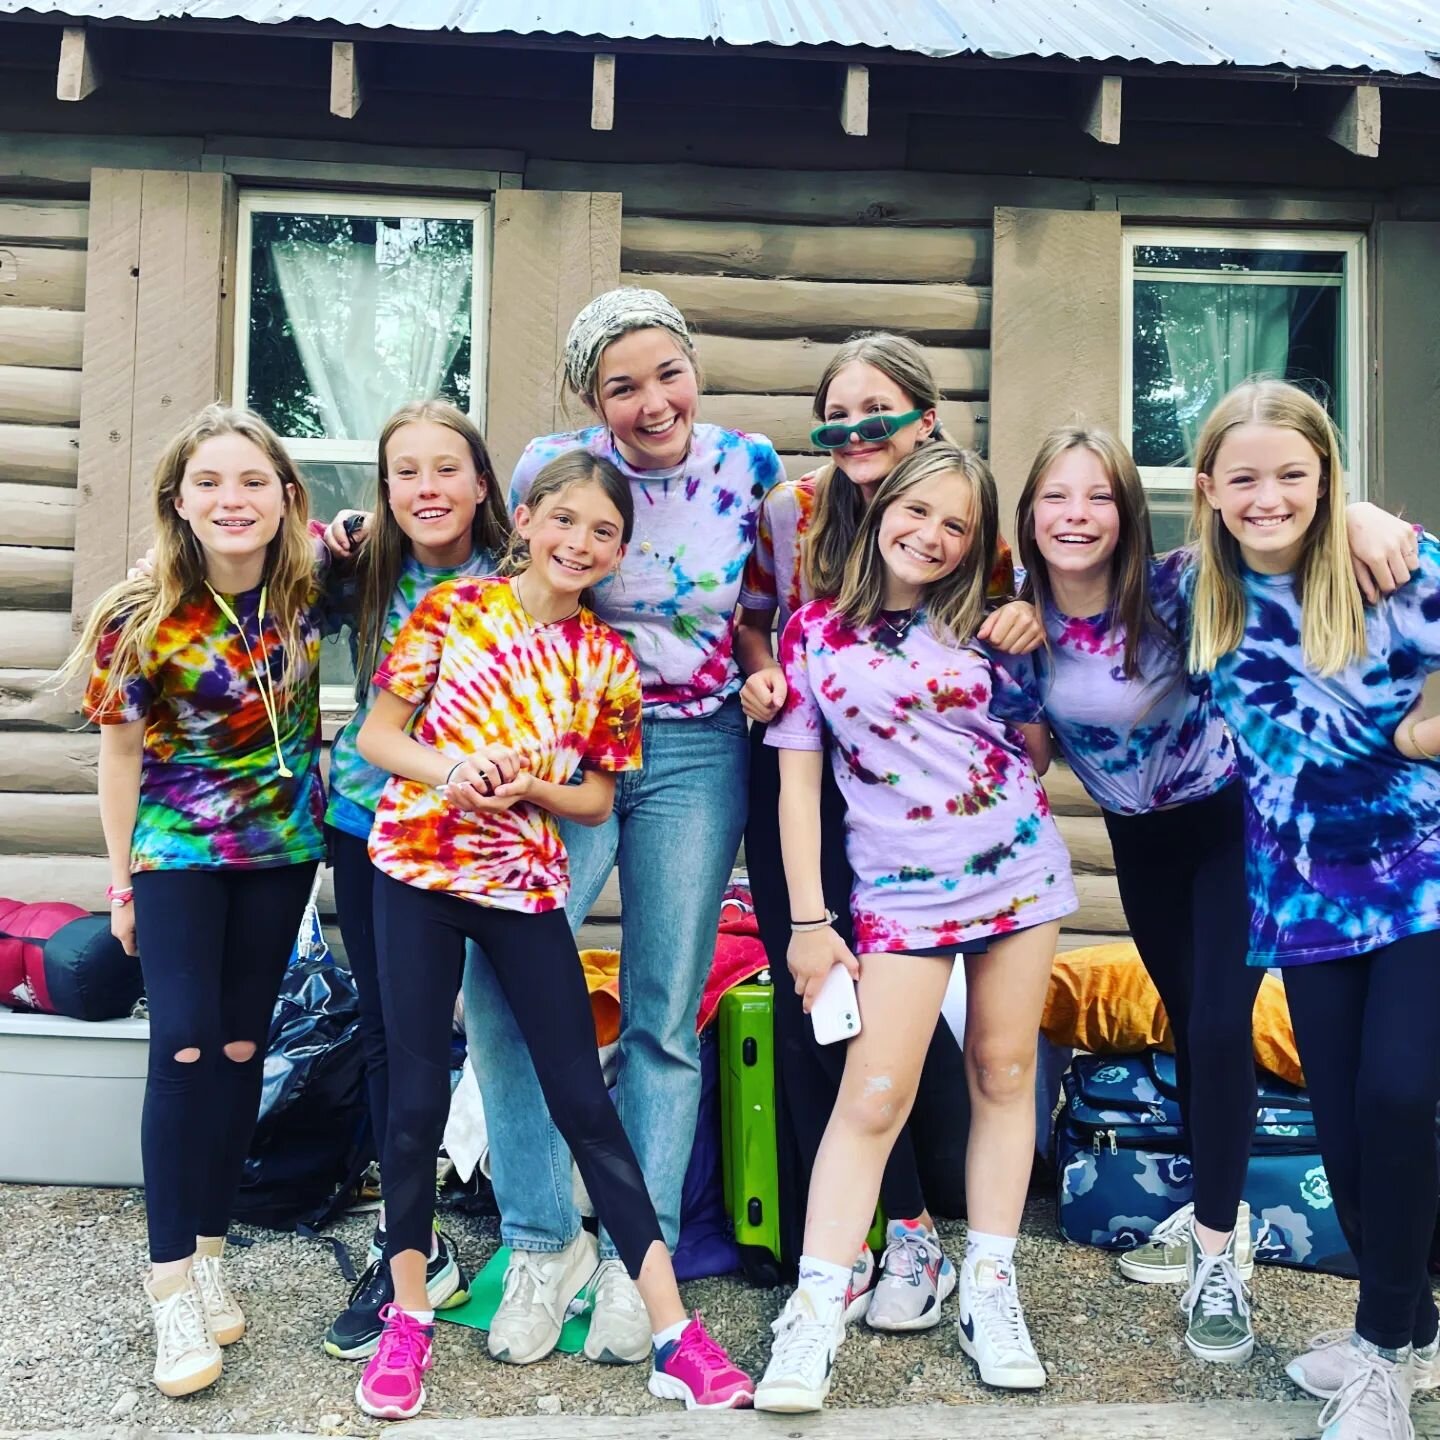 SPACC registration is still open for Grades 5-12! Join us for a week in the mountains for this conservatory style, process based camp where young artists are encouraged to take artistic risks and explore new ideas. 

June 26-July 1 | Register at stth